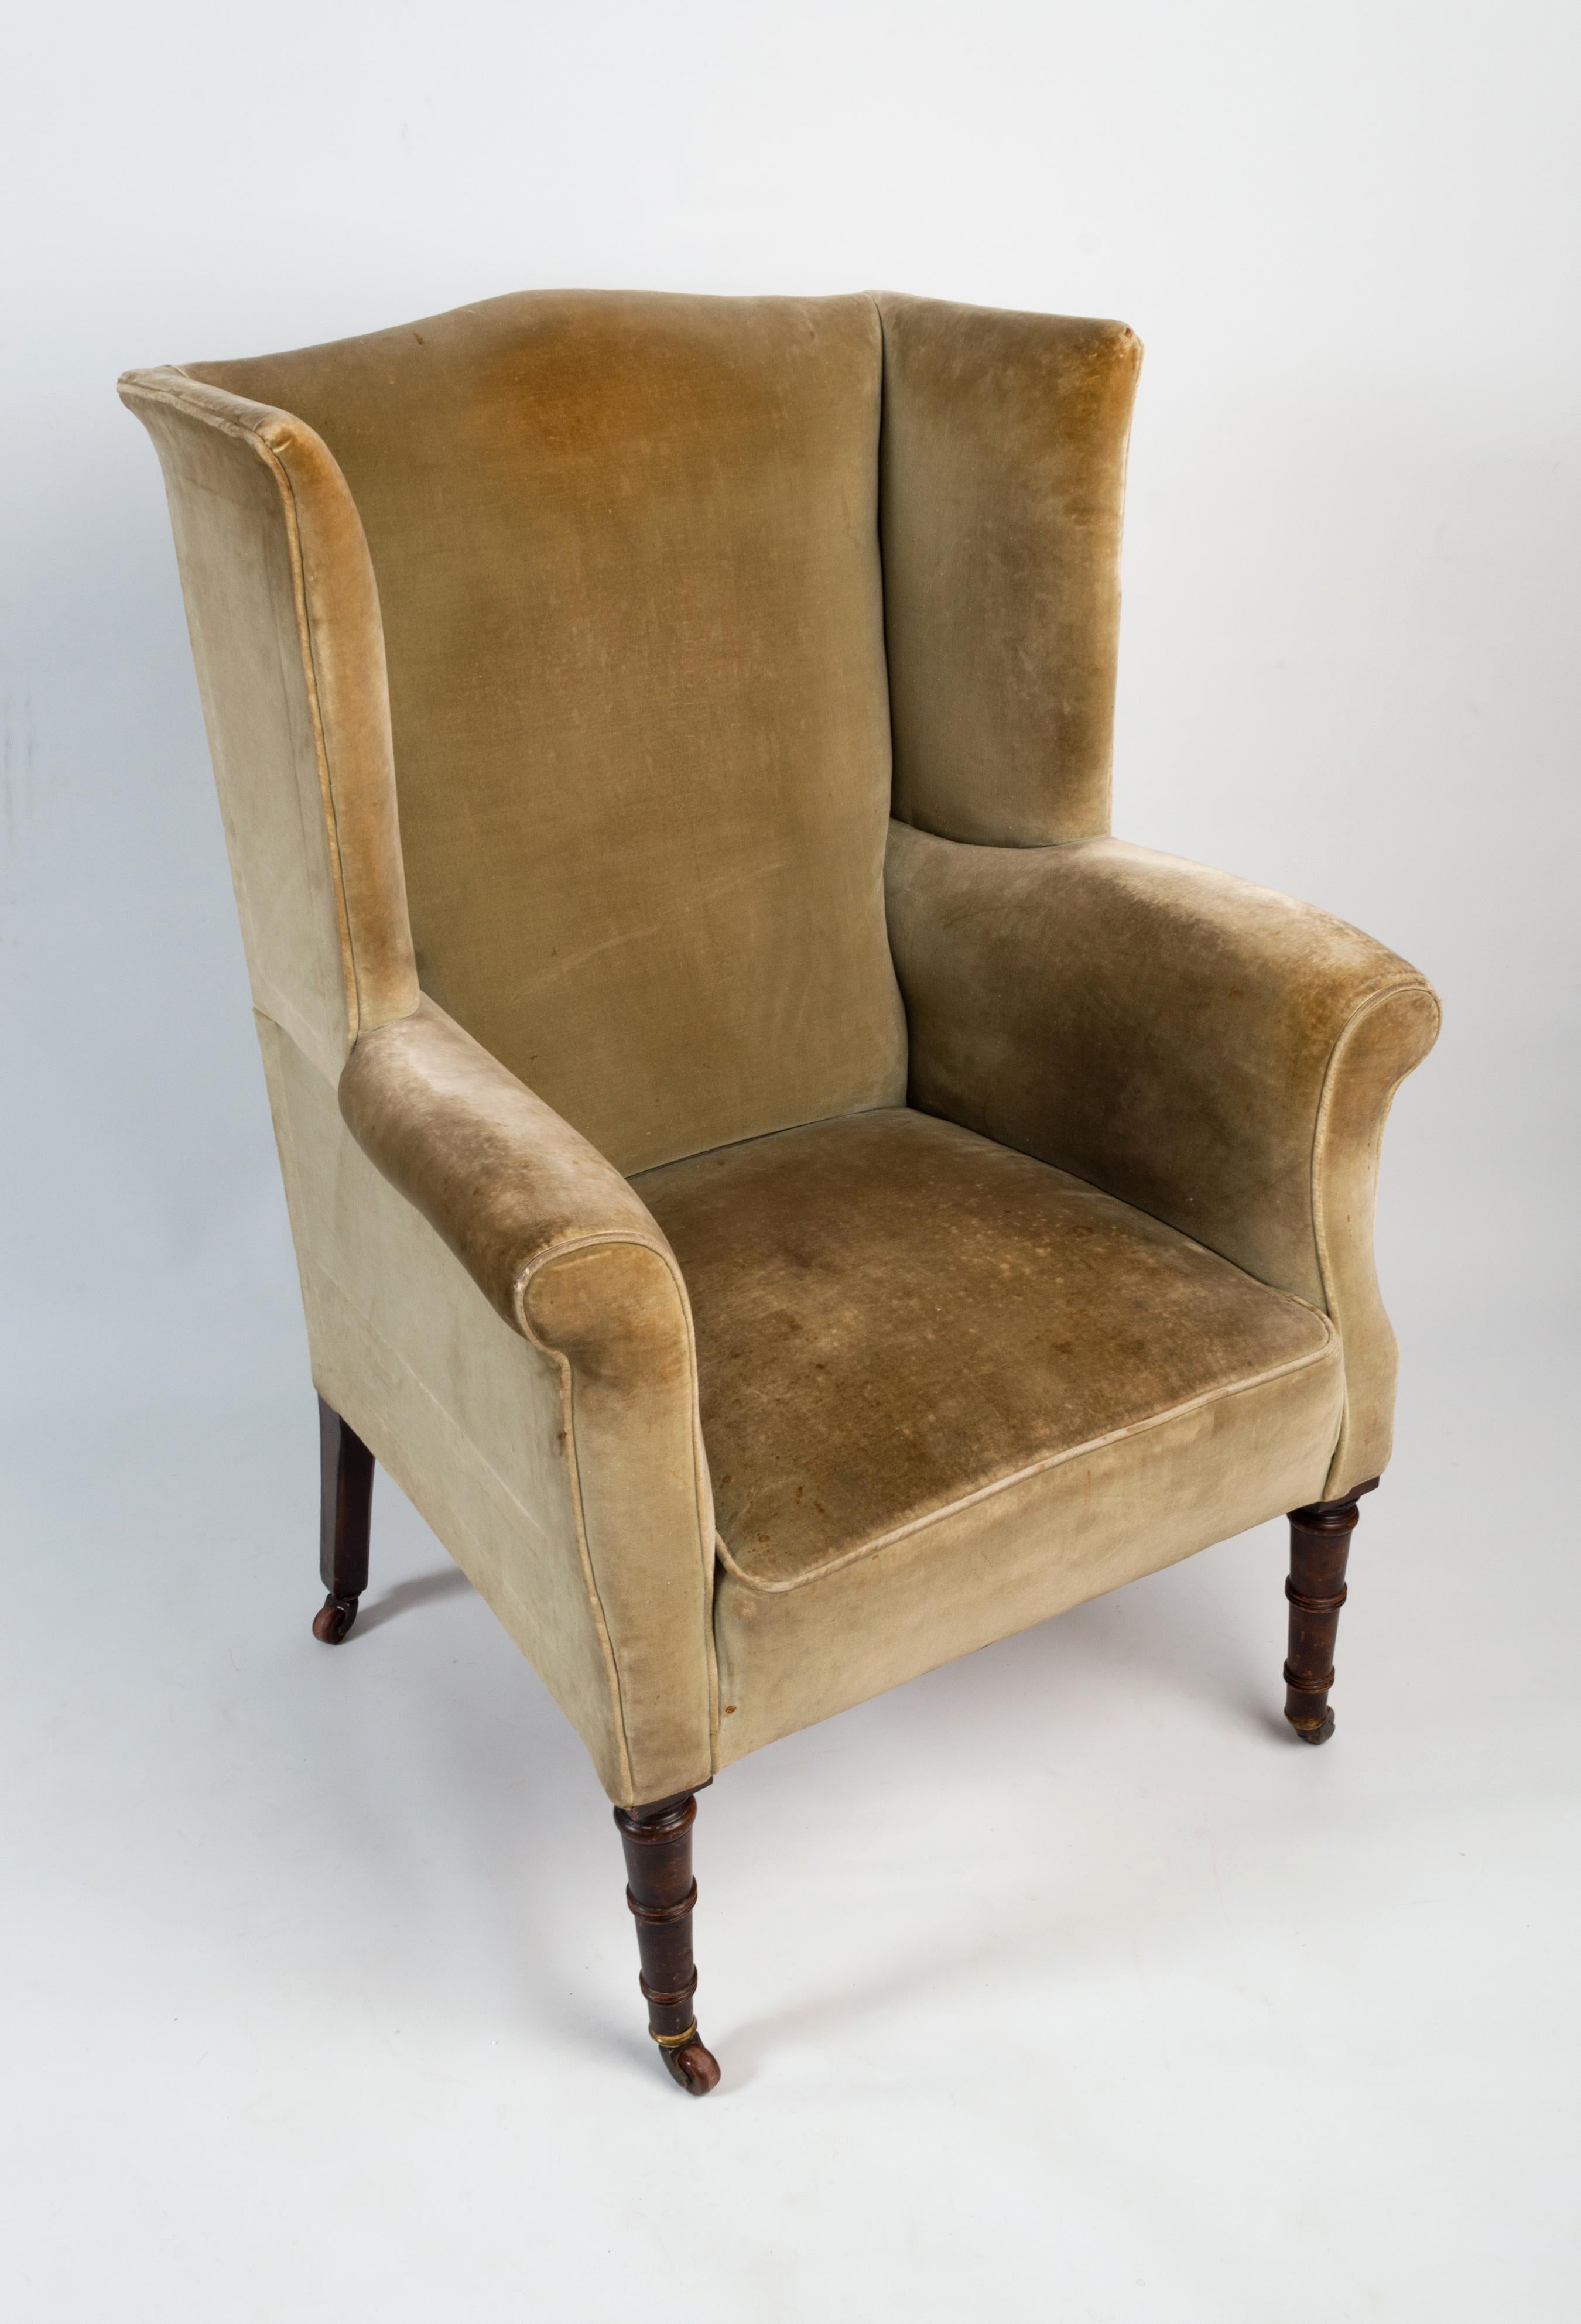 Antique English Regency Wing Armchair, circa 1820 For Sale 4